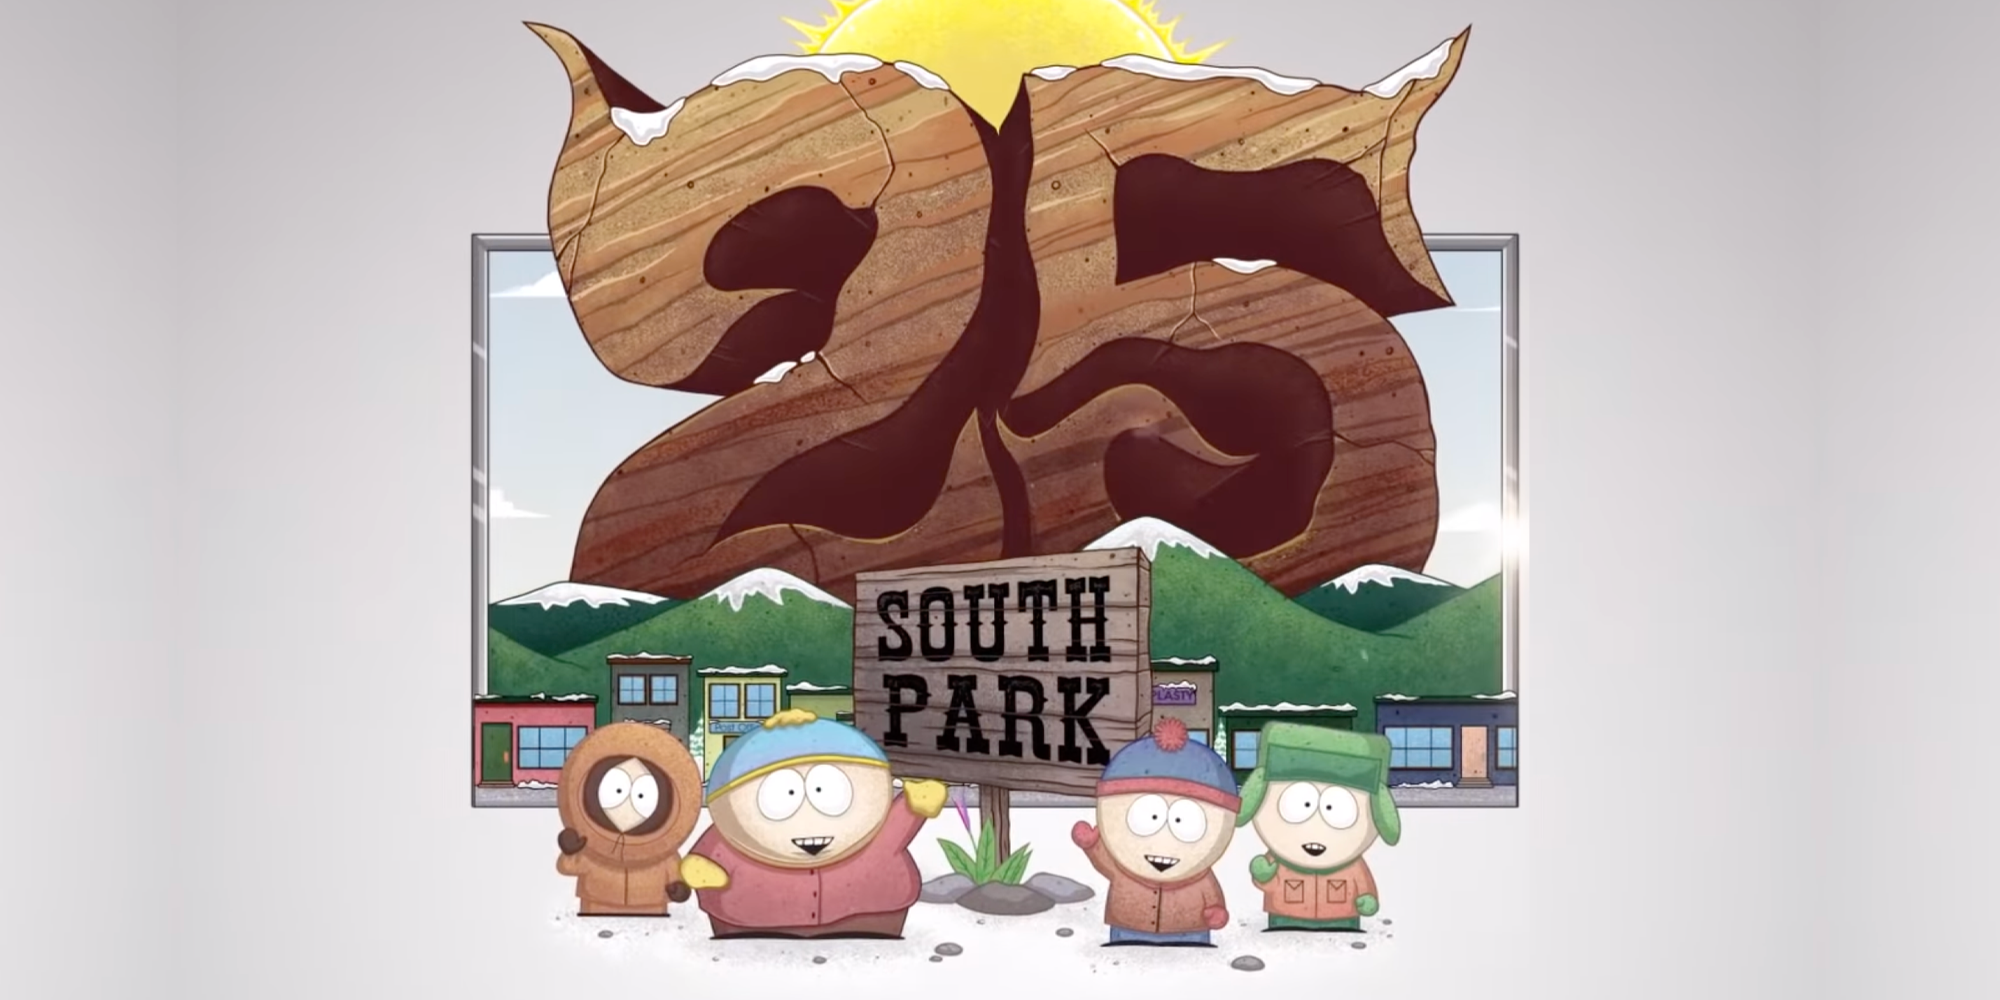 South Park Season 25 Cast Guide: What Every Voice Actor Looks Like